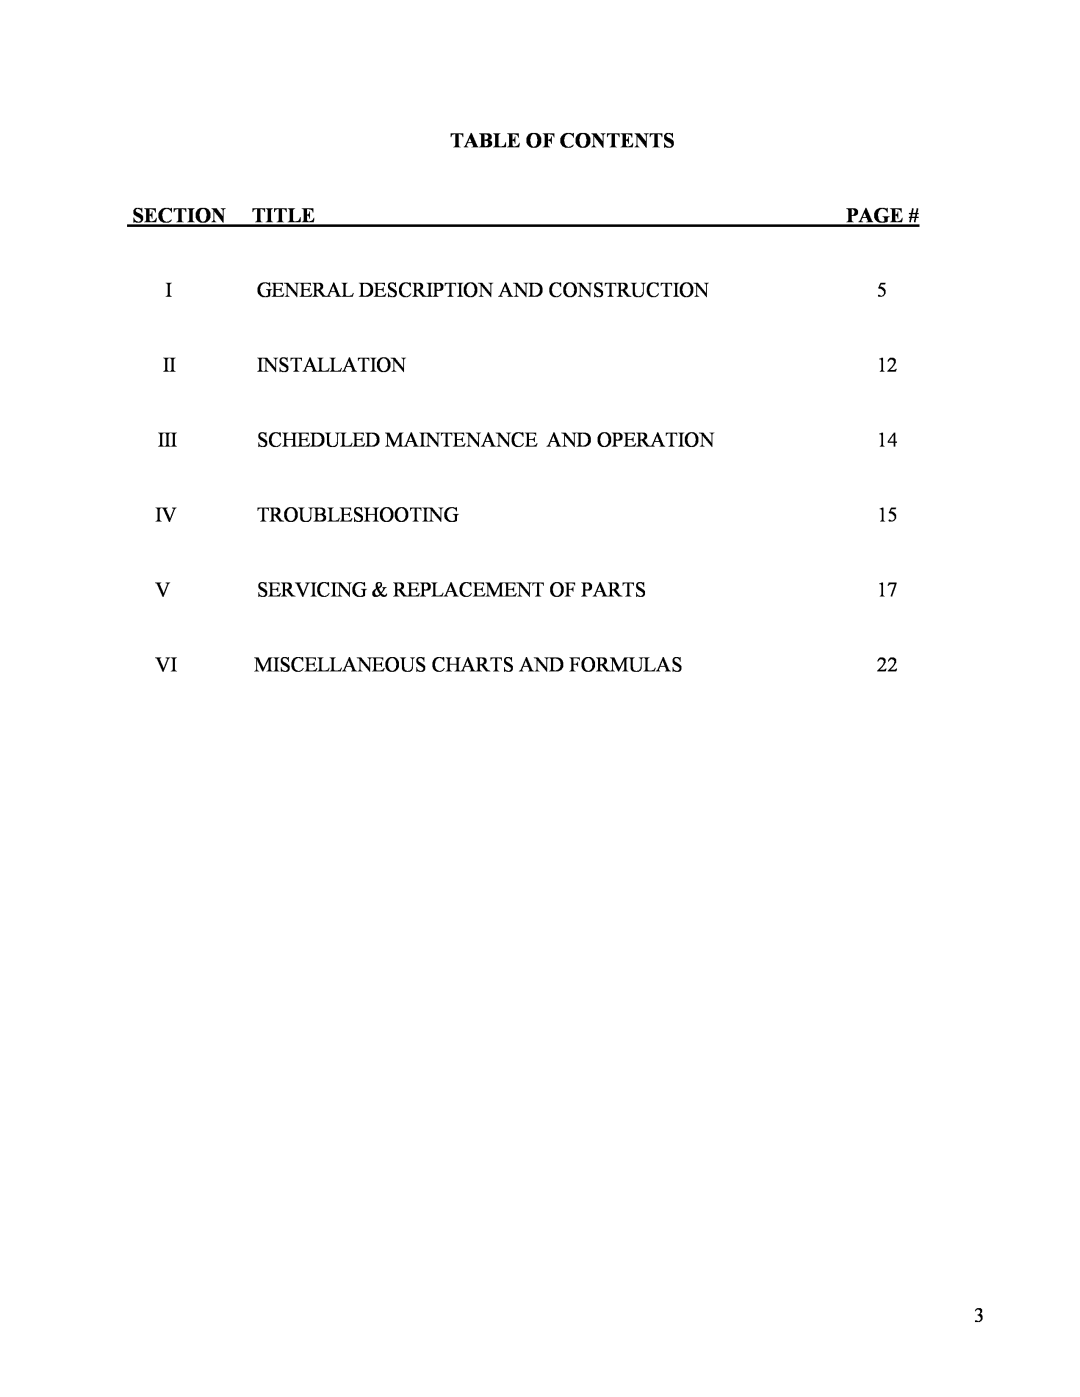 Hubbell CR manual Table Of Contents, Section, Title, Page # 